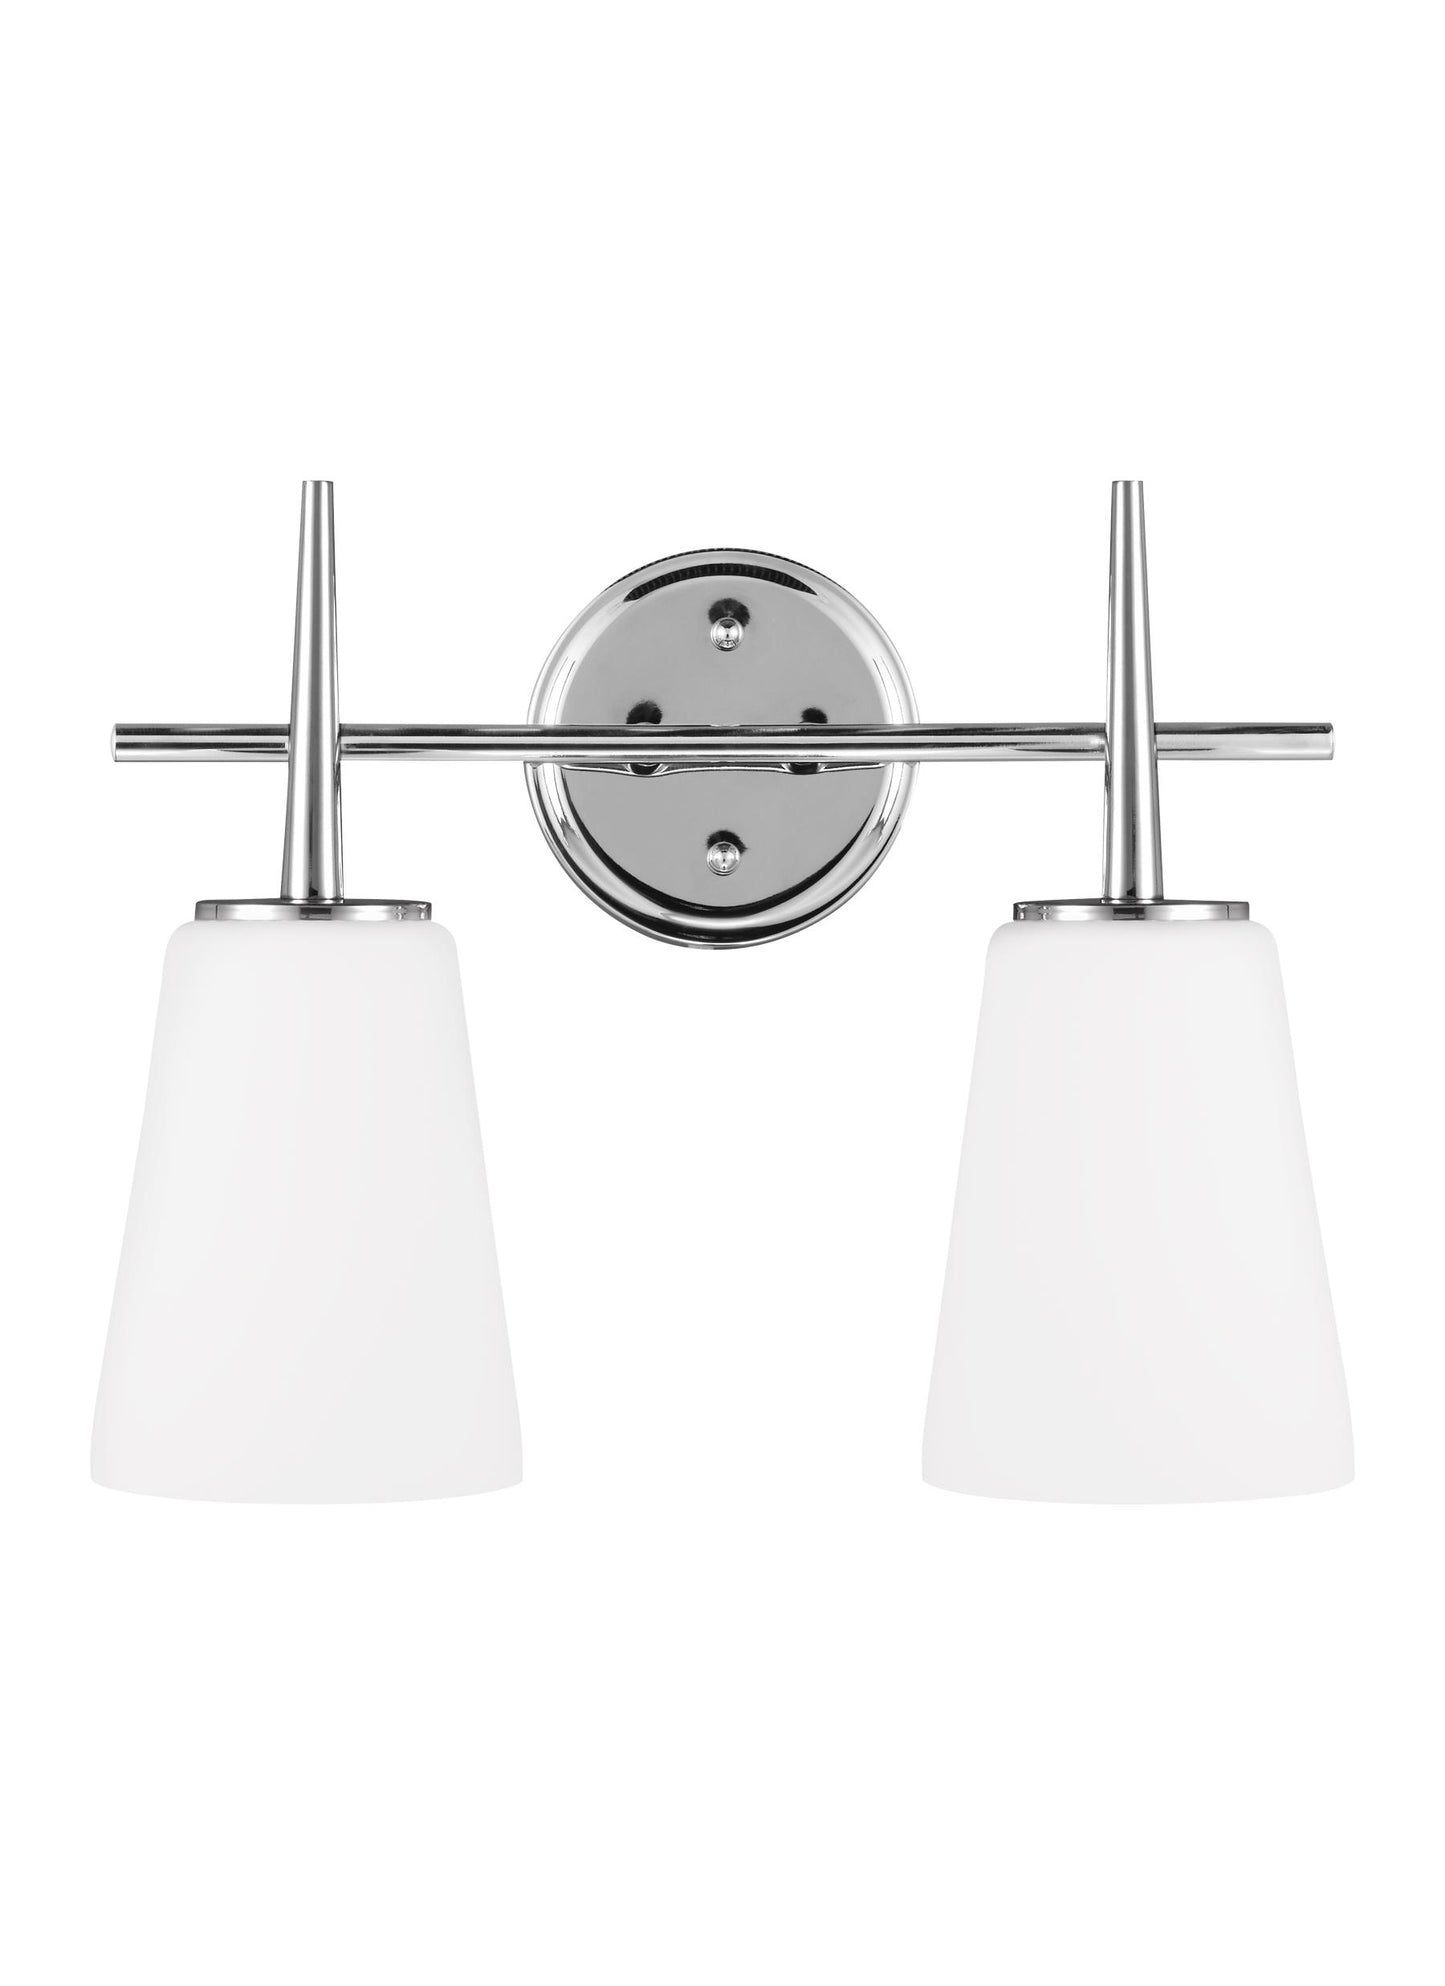 Driscoll contemporary 2-light indoor dimmable bath vanity wall sconce in chrome silver finish with cased opal etched glass